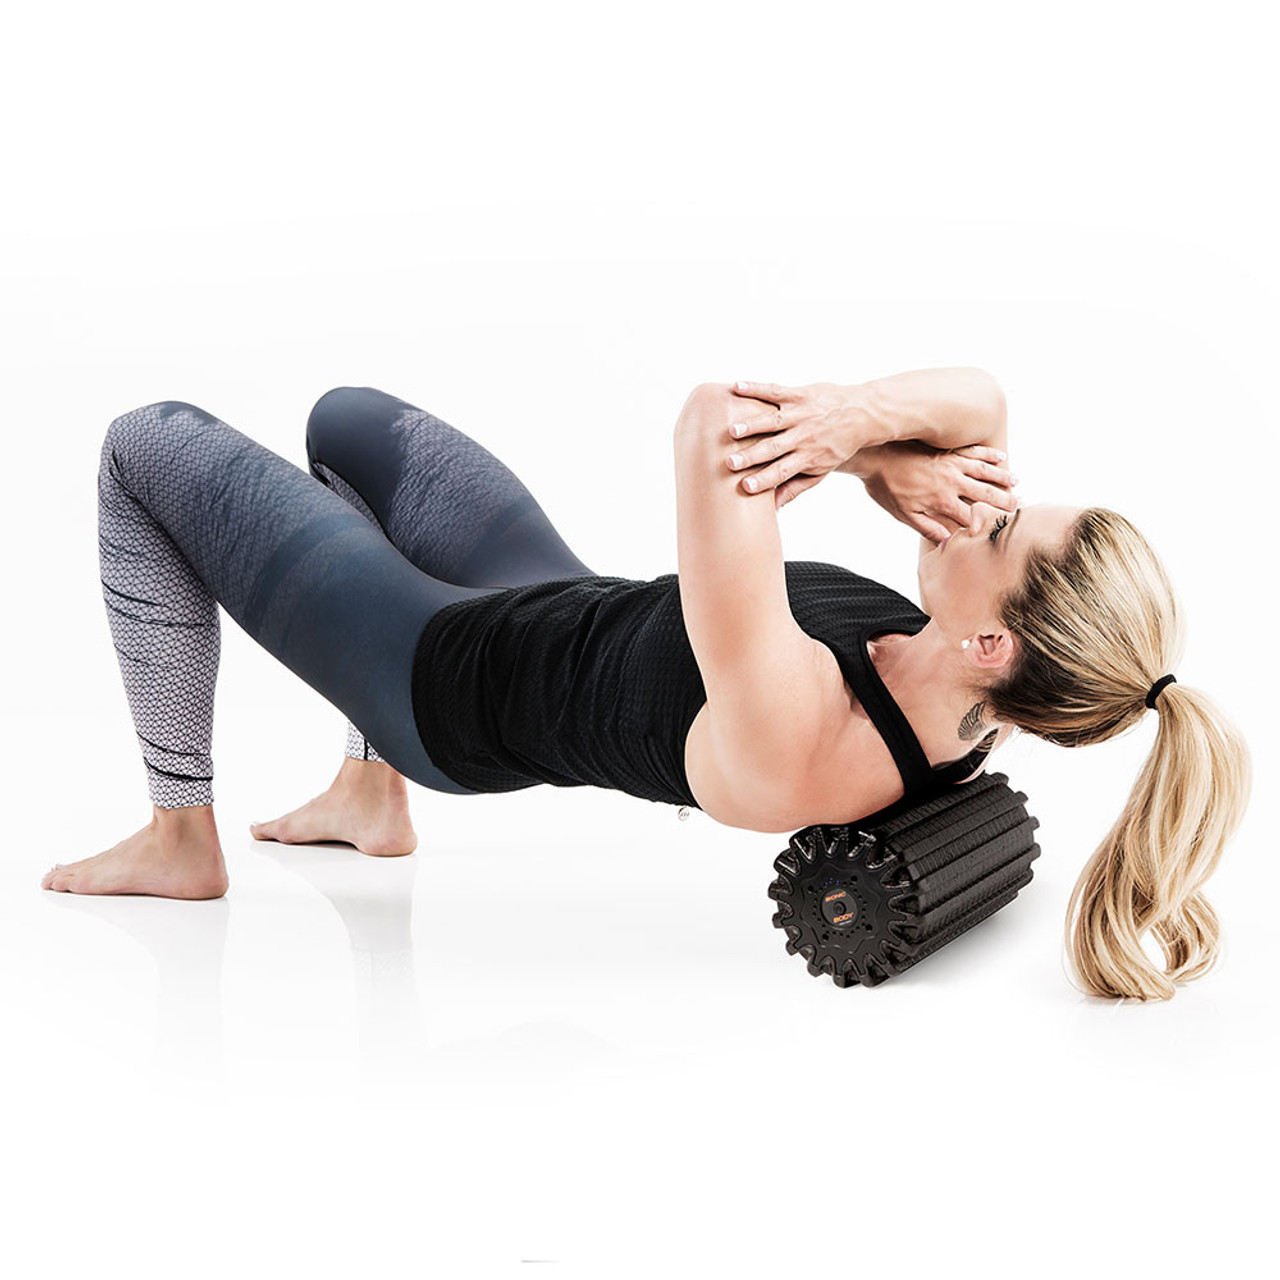 https://cdn11.bigcommerce.com/s-r2fl439k1s/images/stencil/1280x1280/products/394/1397/Bionic-Body-Rechargeable-Vibrating-Recovery-Foam-Roller-Massager-BBVYP-Kim-Lyons-thereputic-back__98466.1669750746.jpg?c=2